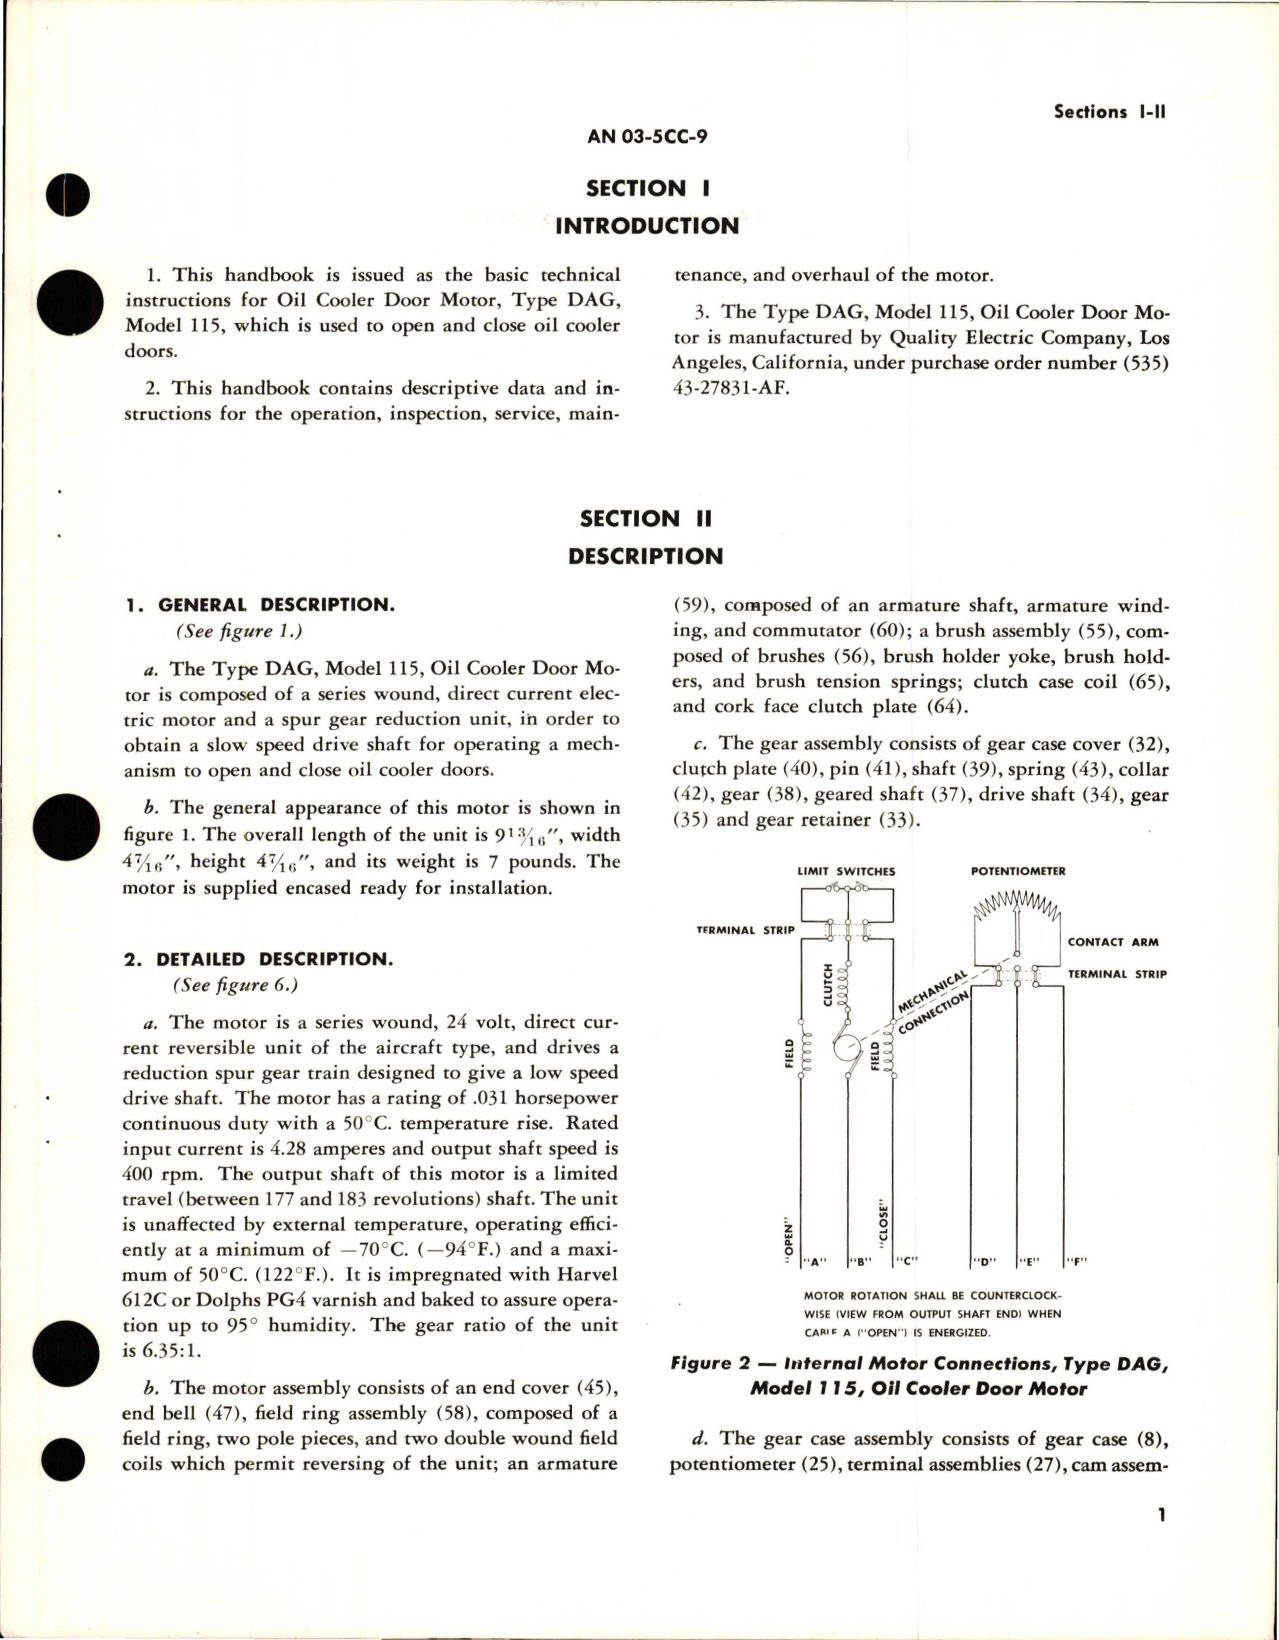 Sample page 5 from AirCorps Library document: Instructions with Parts Catalog for Oil Cooler Door Motor - Type DAG Model 115